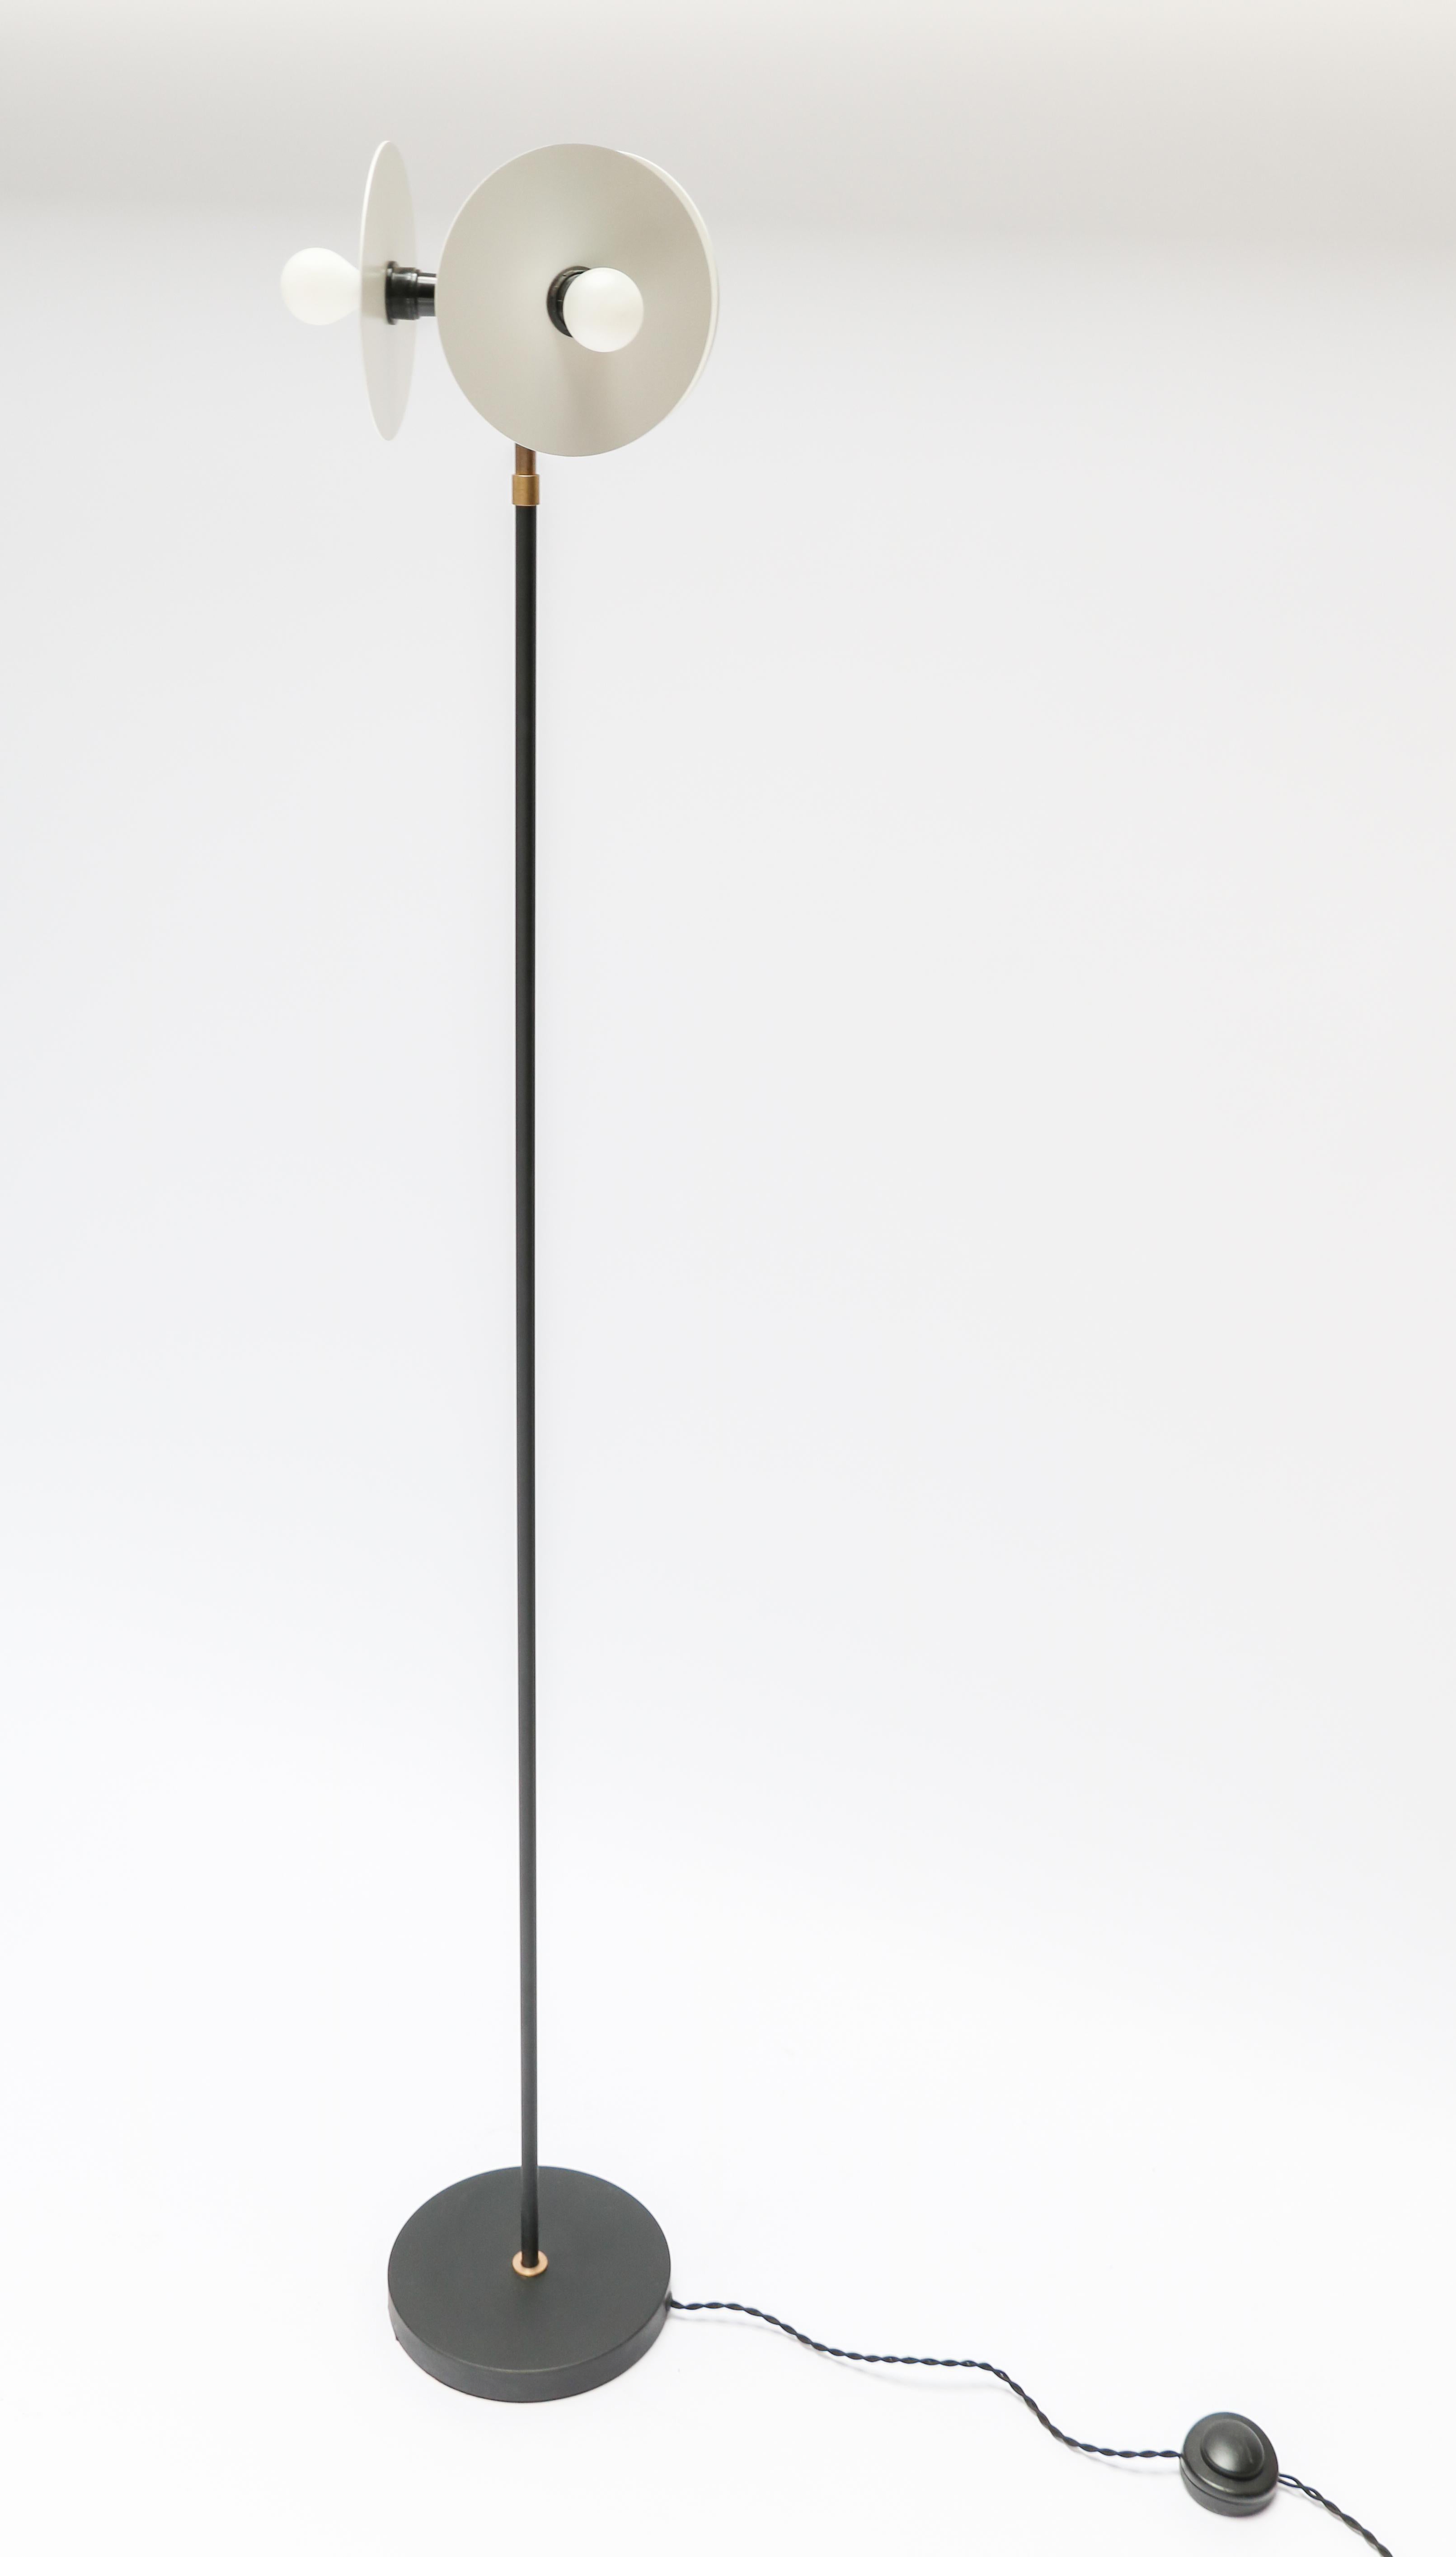 Custom midcentury style floor lamp in brass and white and black metal with three sockets. Can be done in different sizes and configurations.